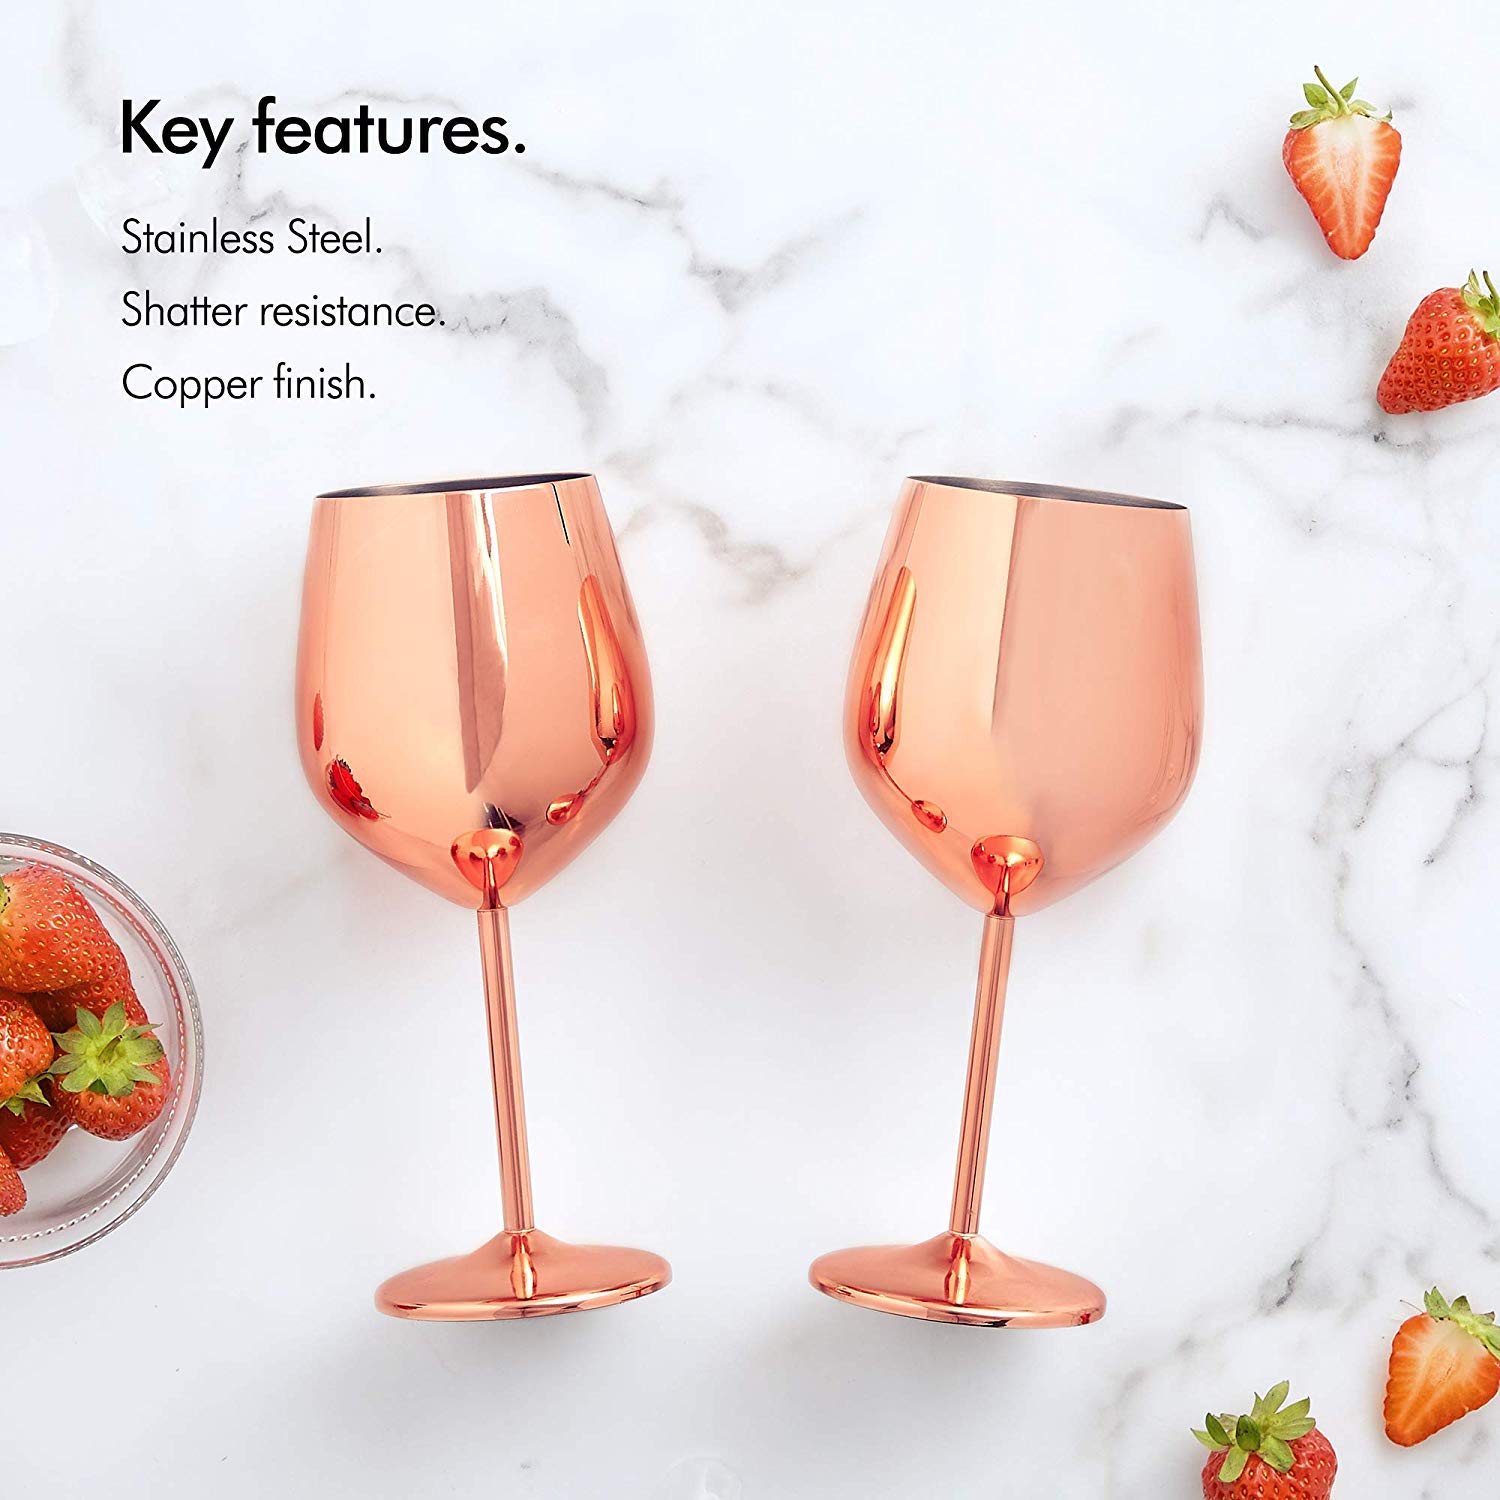 NJ Stainless Steel Stemmed Wine Glasses with 4 Ice Cubes, Shatter Proof Copper Coated Unbreakable Wine Glass Goblets, Premium Gift for Men and Women, Party Supplies - 360 ml : 2 Pcs